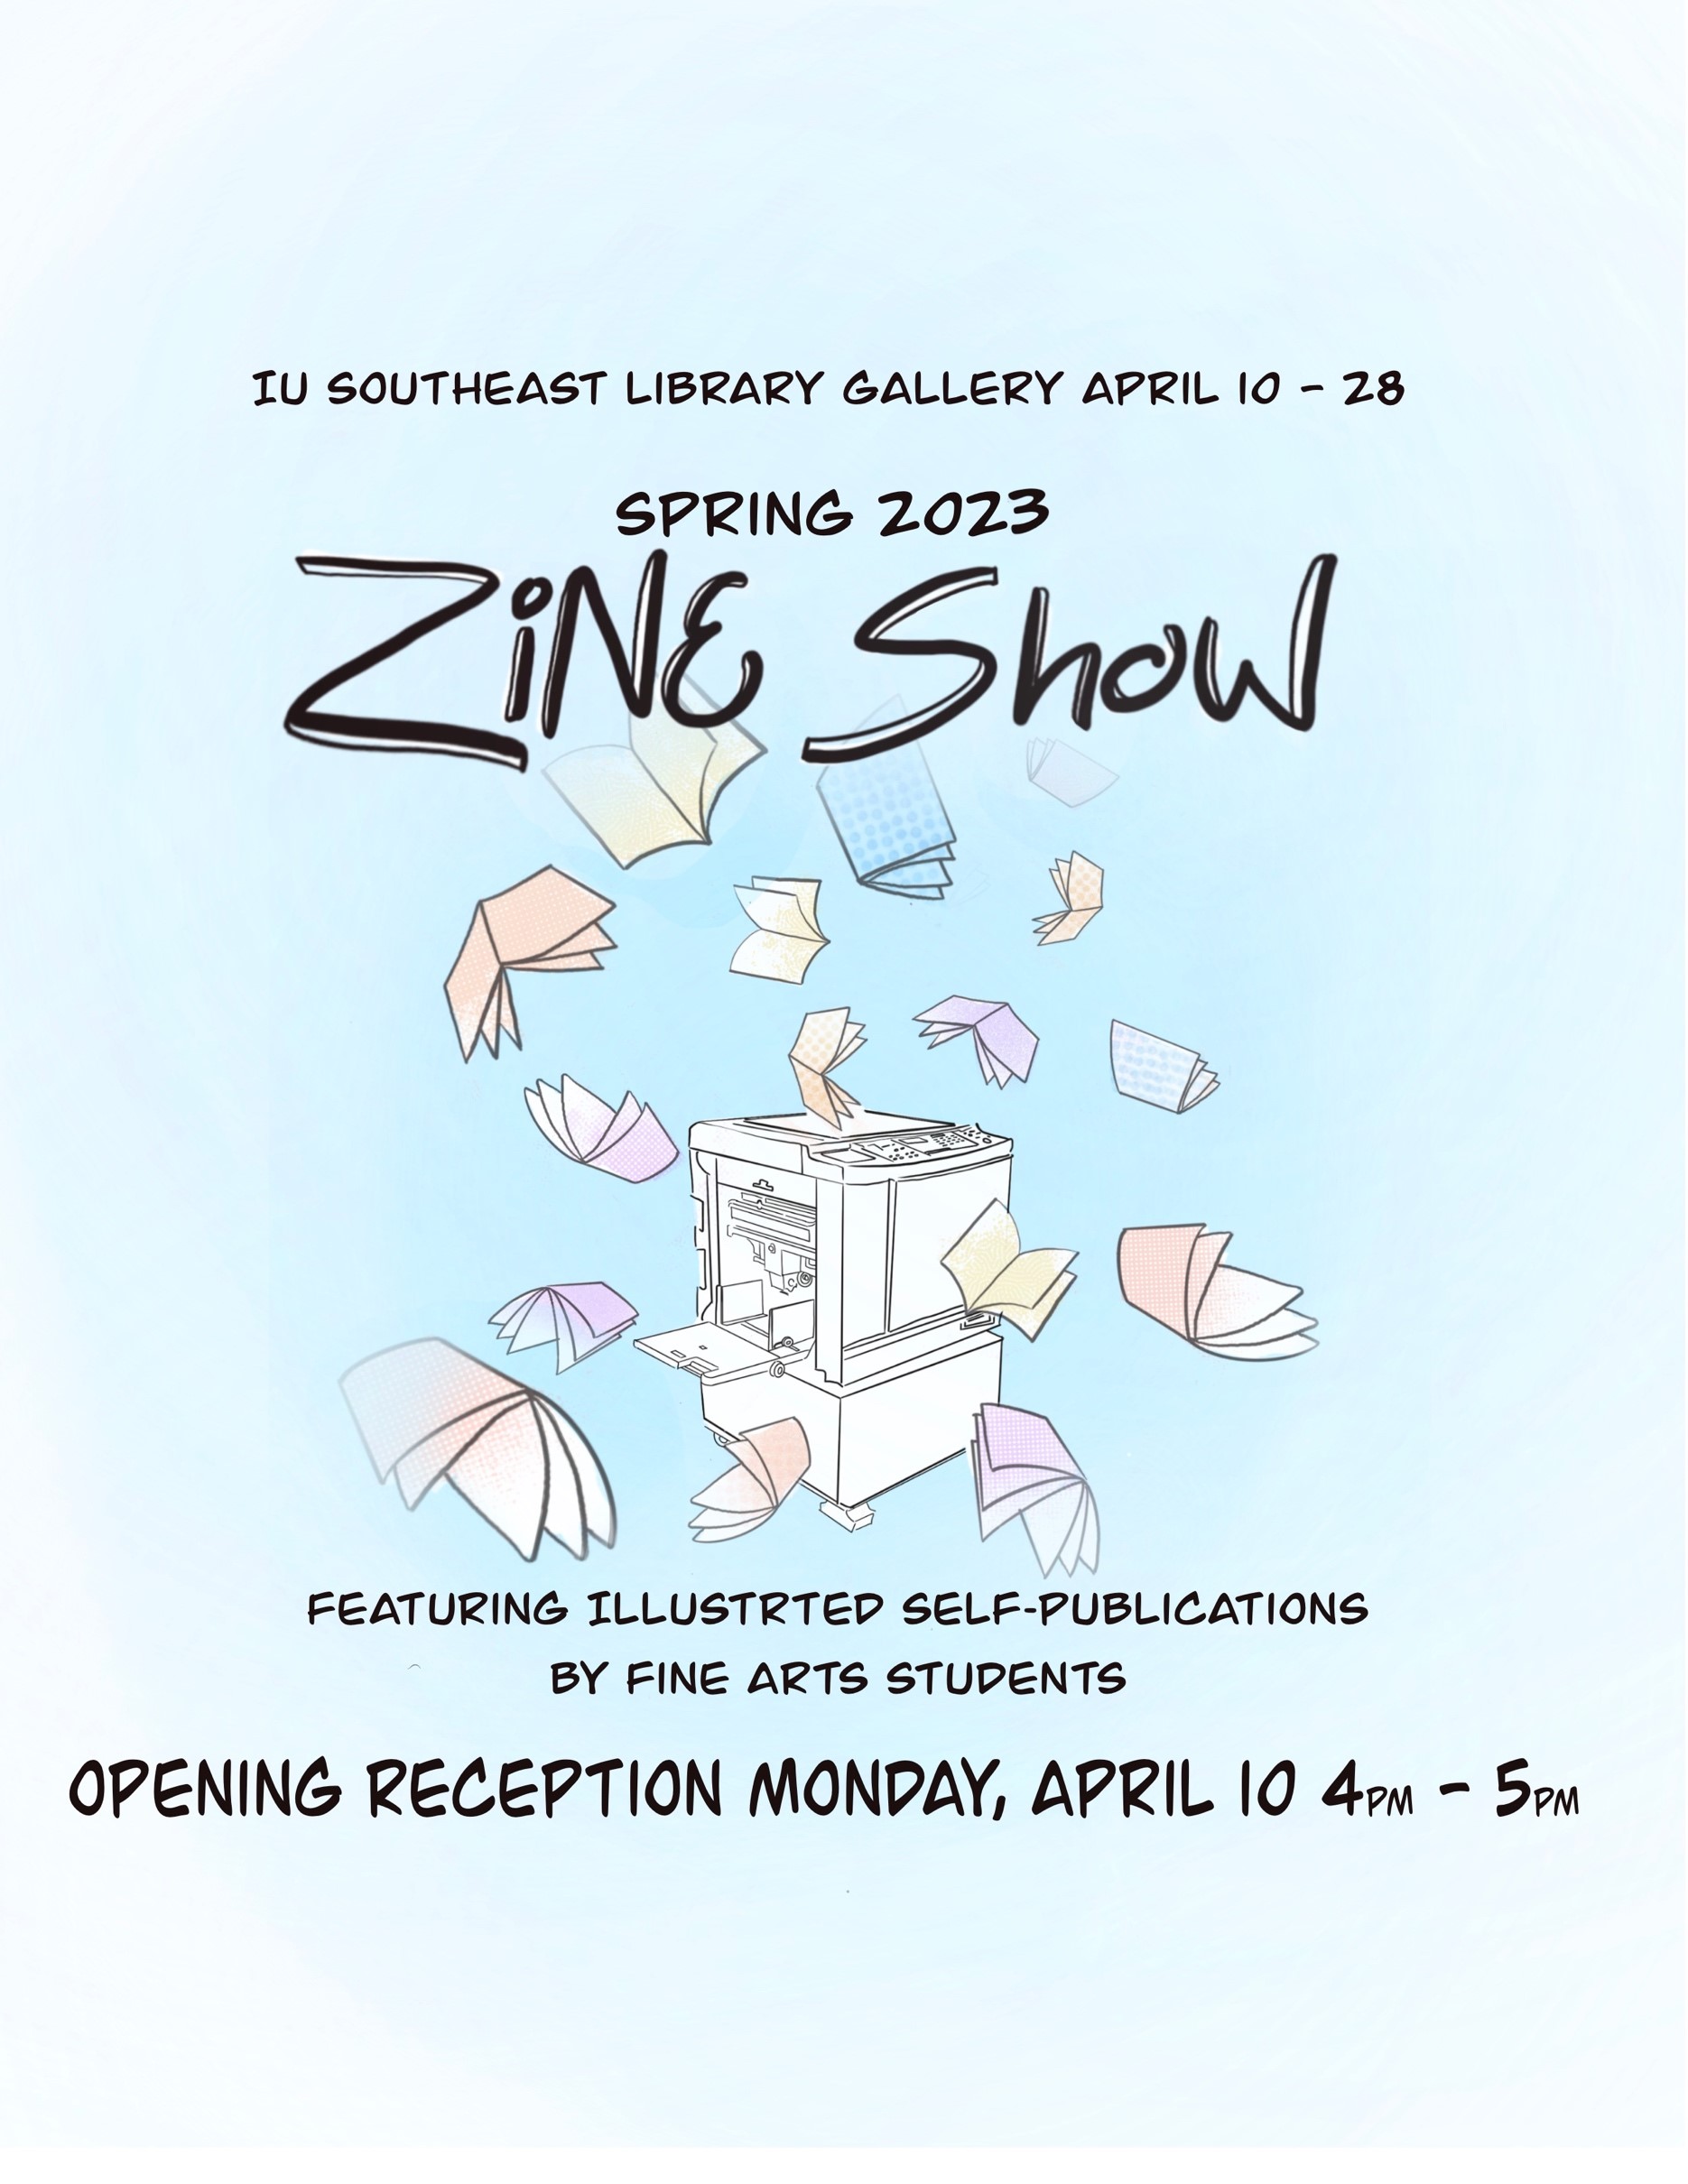 Illustration of a printer surrounded by flying zines in a blue background with the words Spring 2023 Zine Show